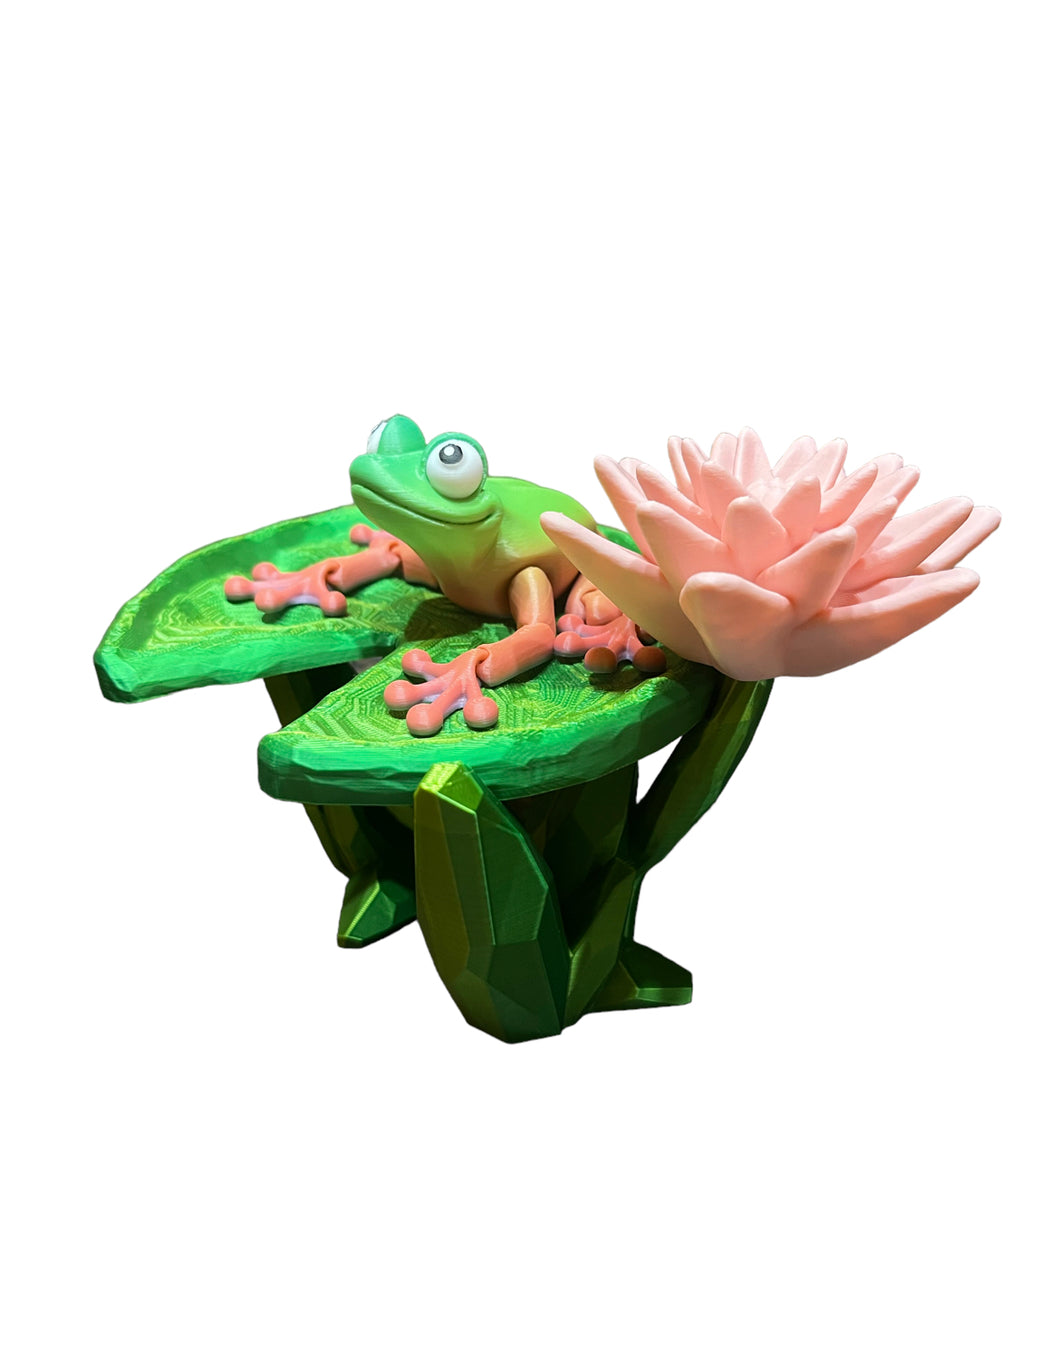 3D Printed Metallic Green Lily Pad for Frog (Frog Not Included) - Ready to Ship